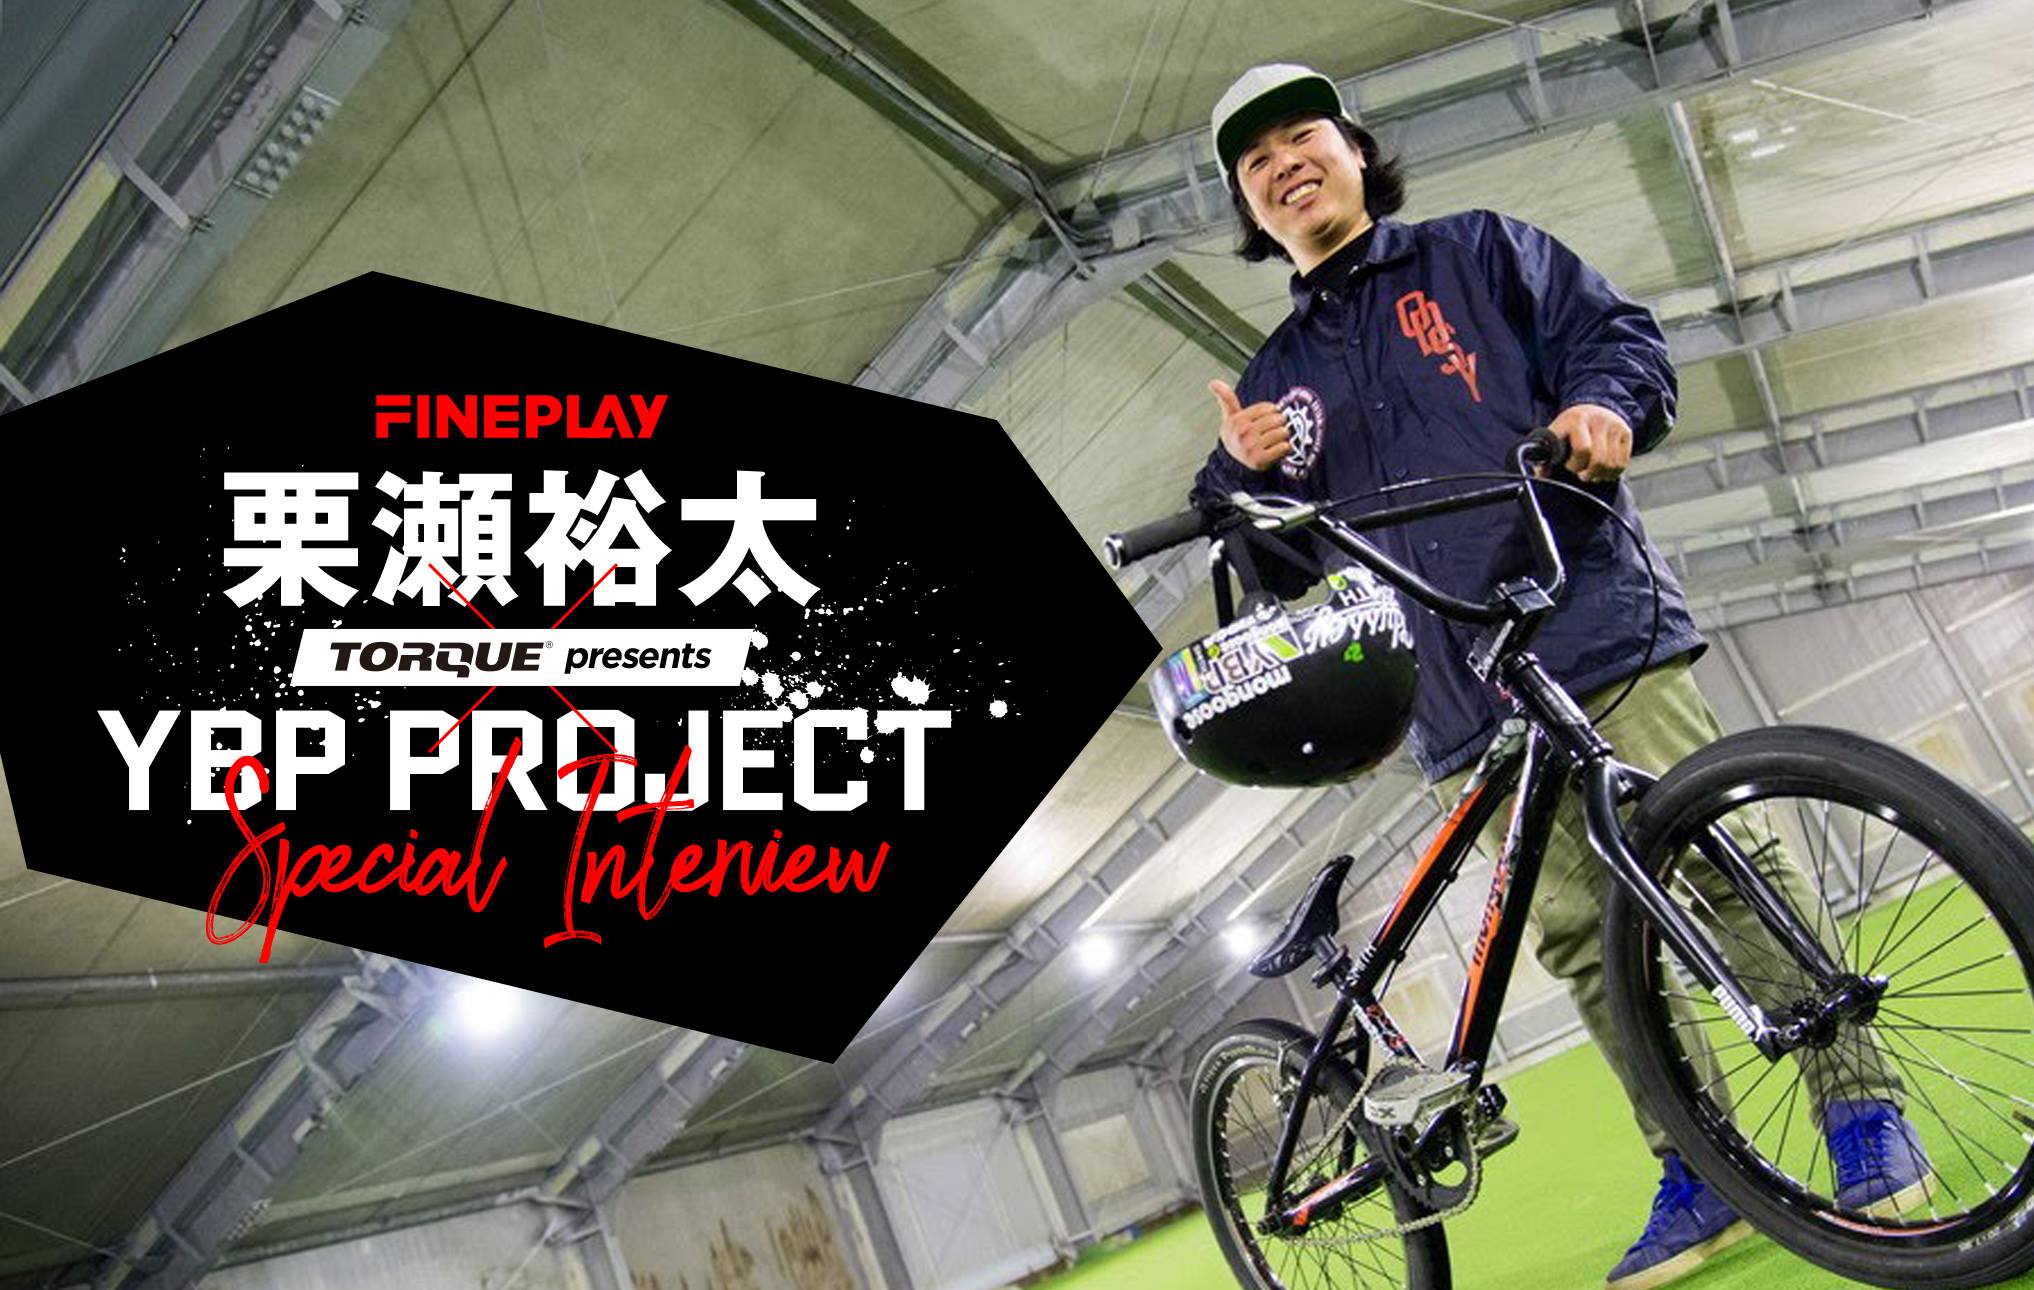 Special Interview】栗瀬裕太さん×YBP PROJECT | FINEPLAY